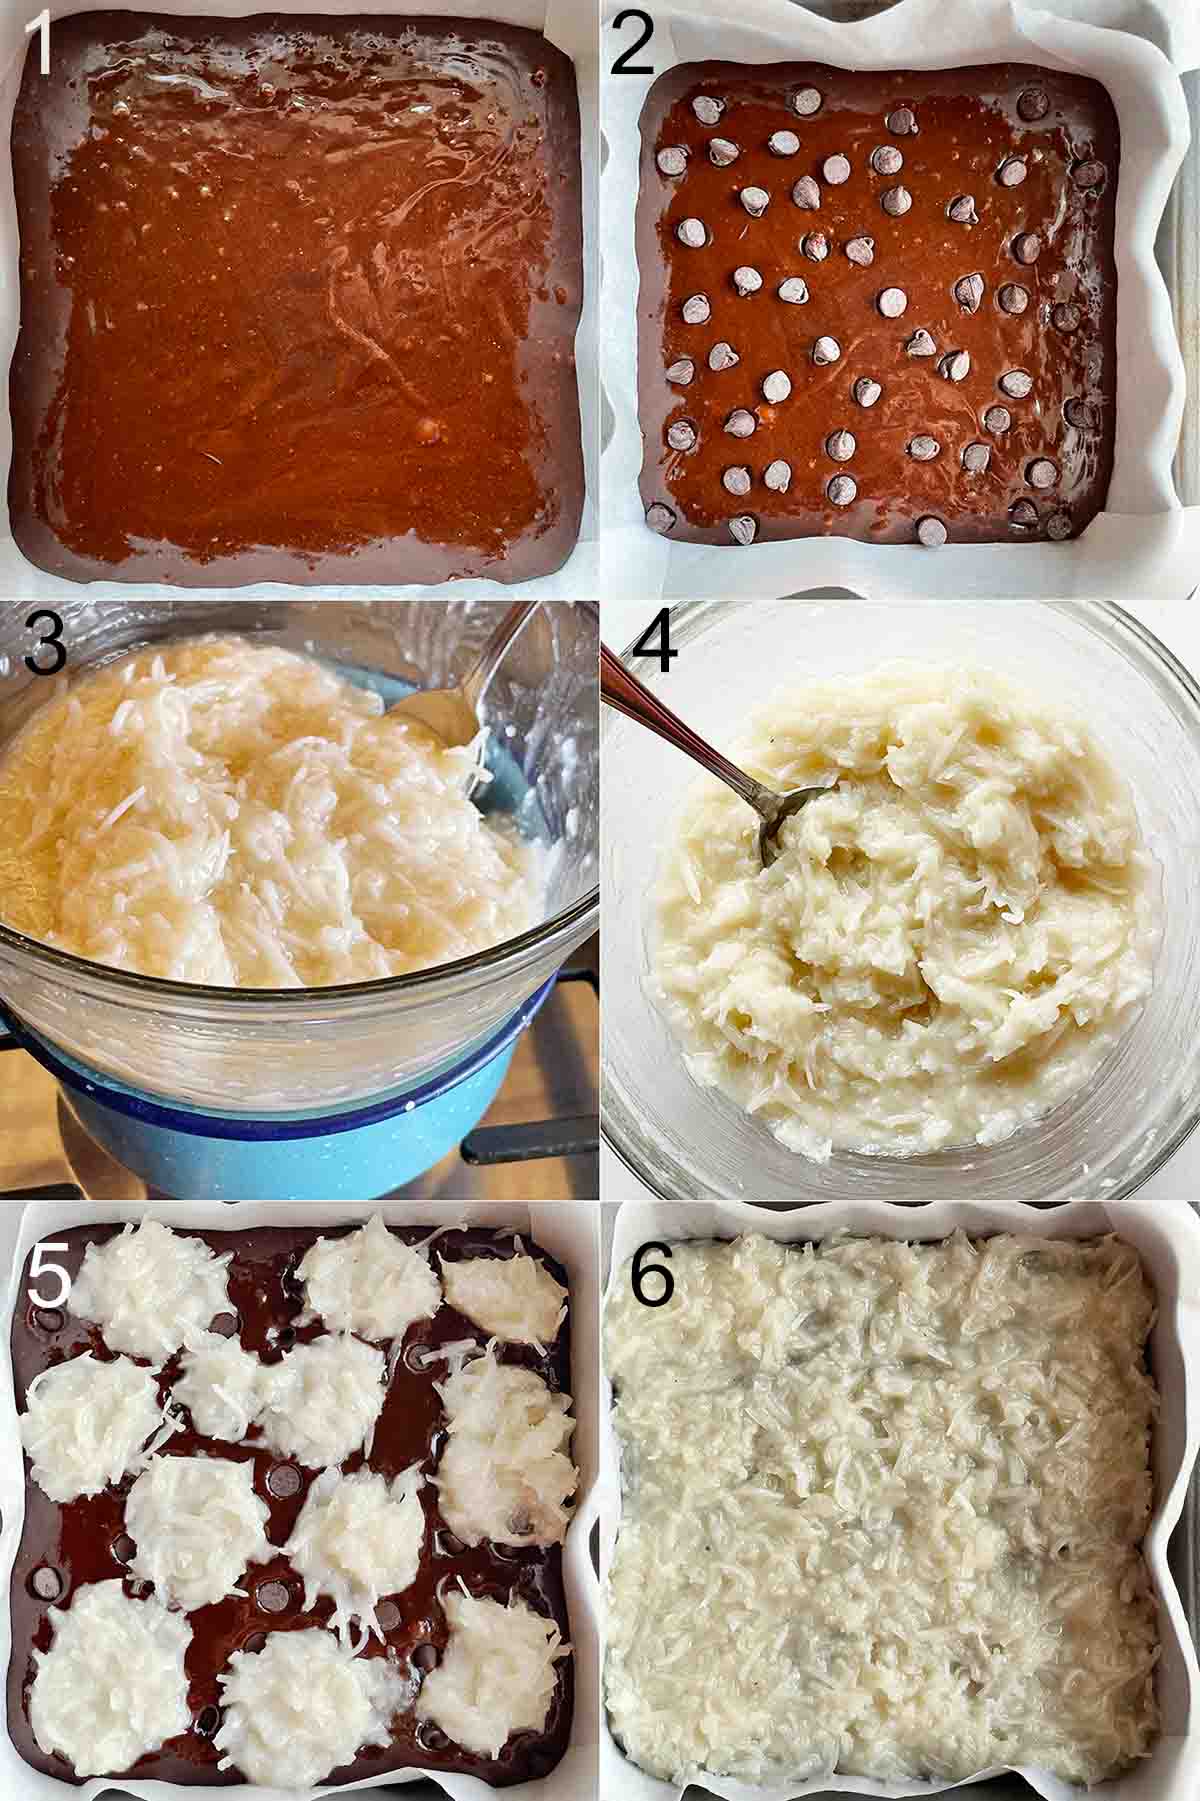 collage of 6 images showing steps of how to make coconut brownies